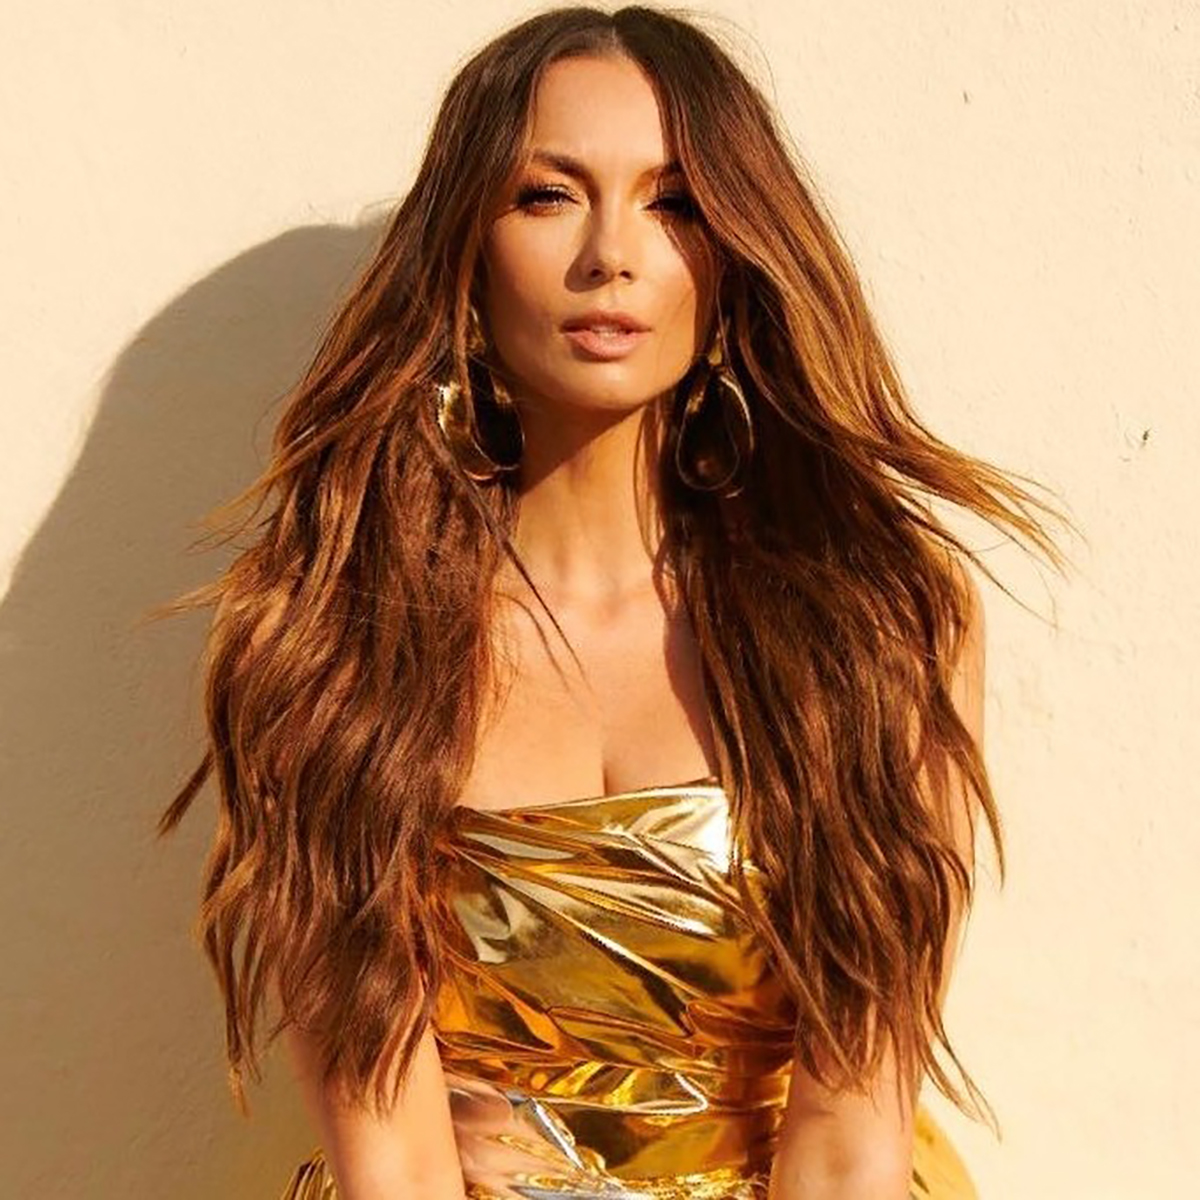 Ricki-Lee touches on being crazy in love in her new single, 'Last Night' -  Eat This Music